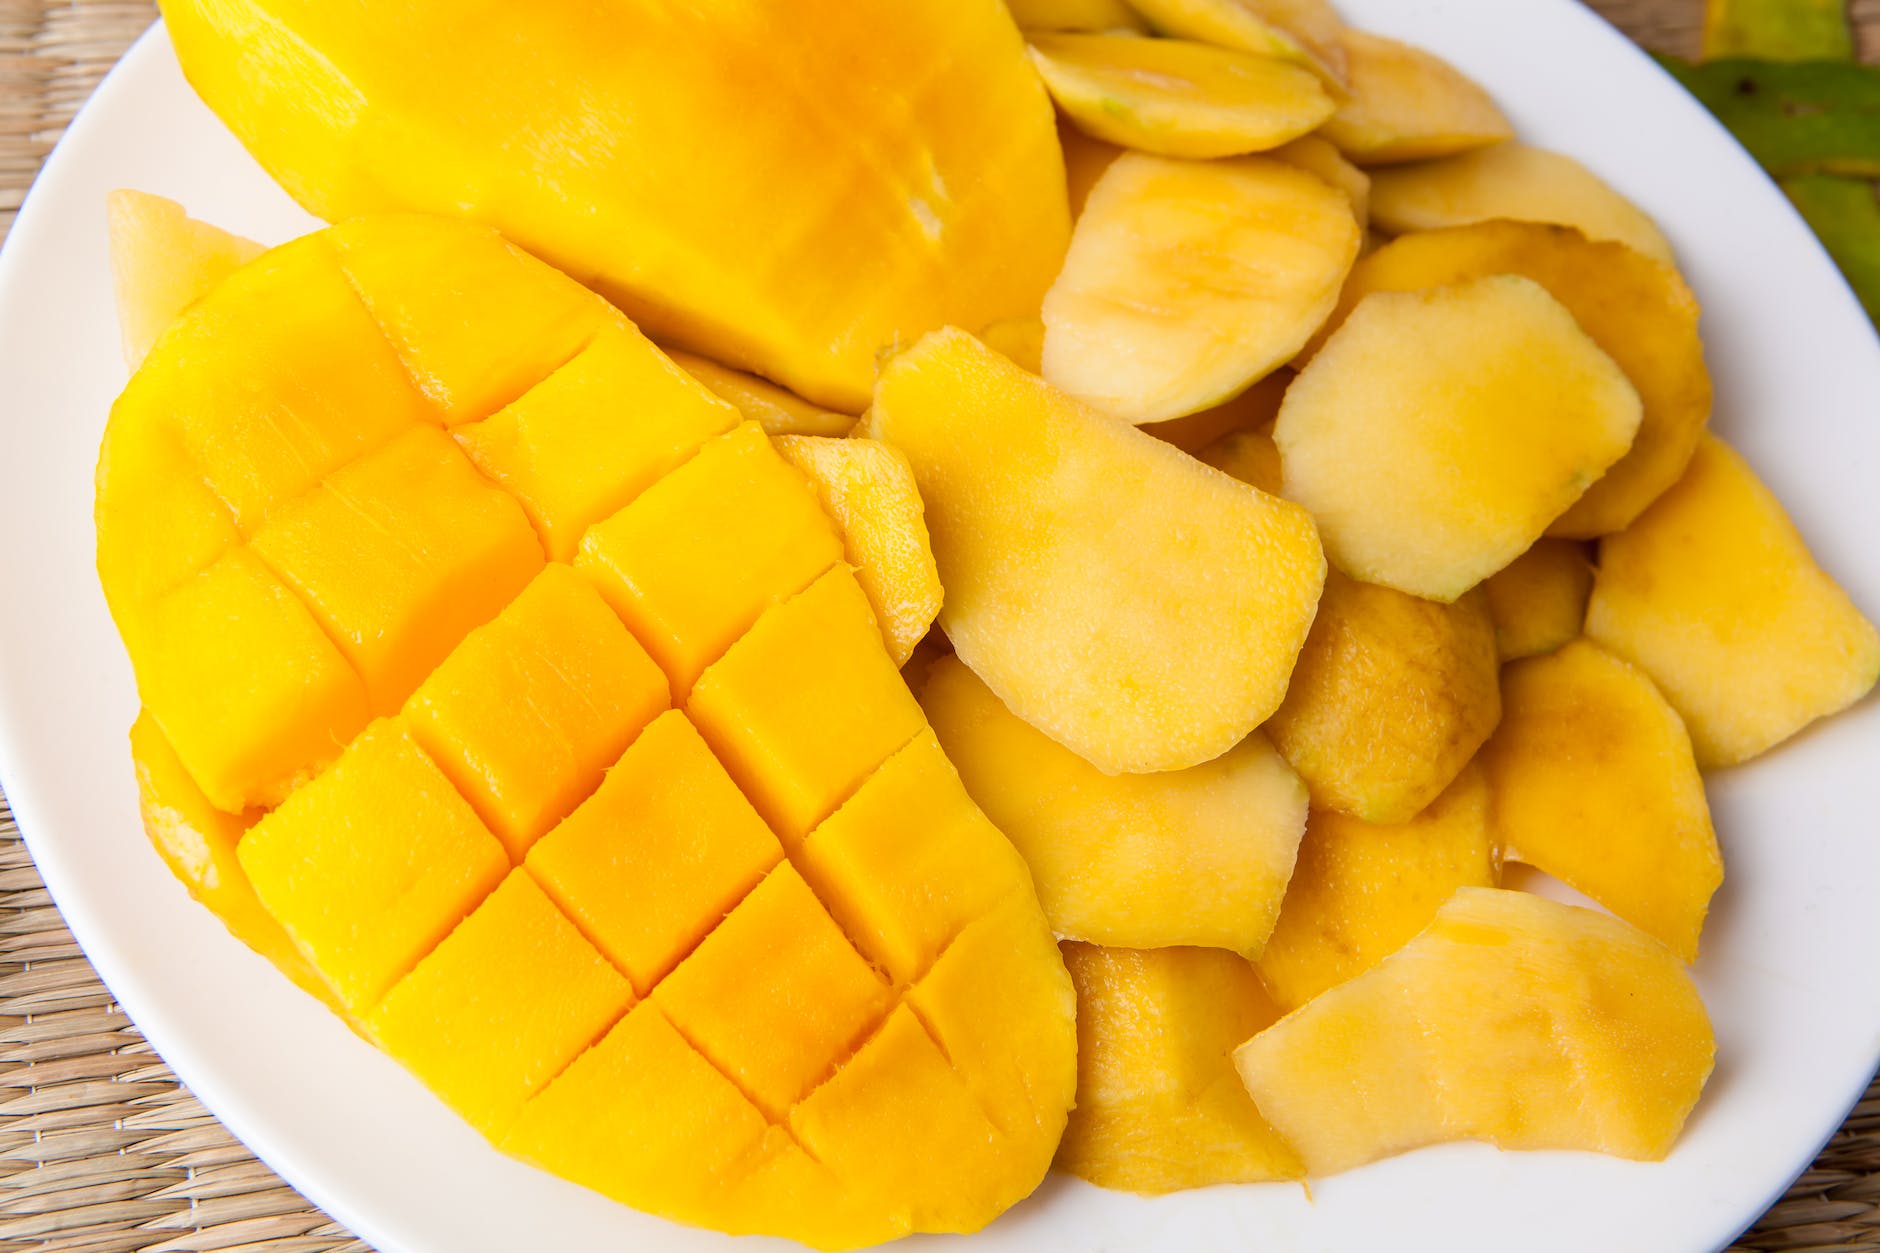 yellow sliced fruit on white plate